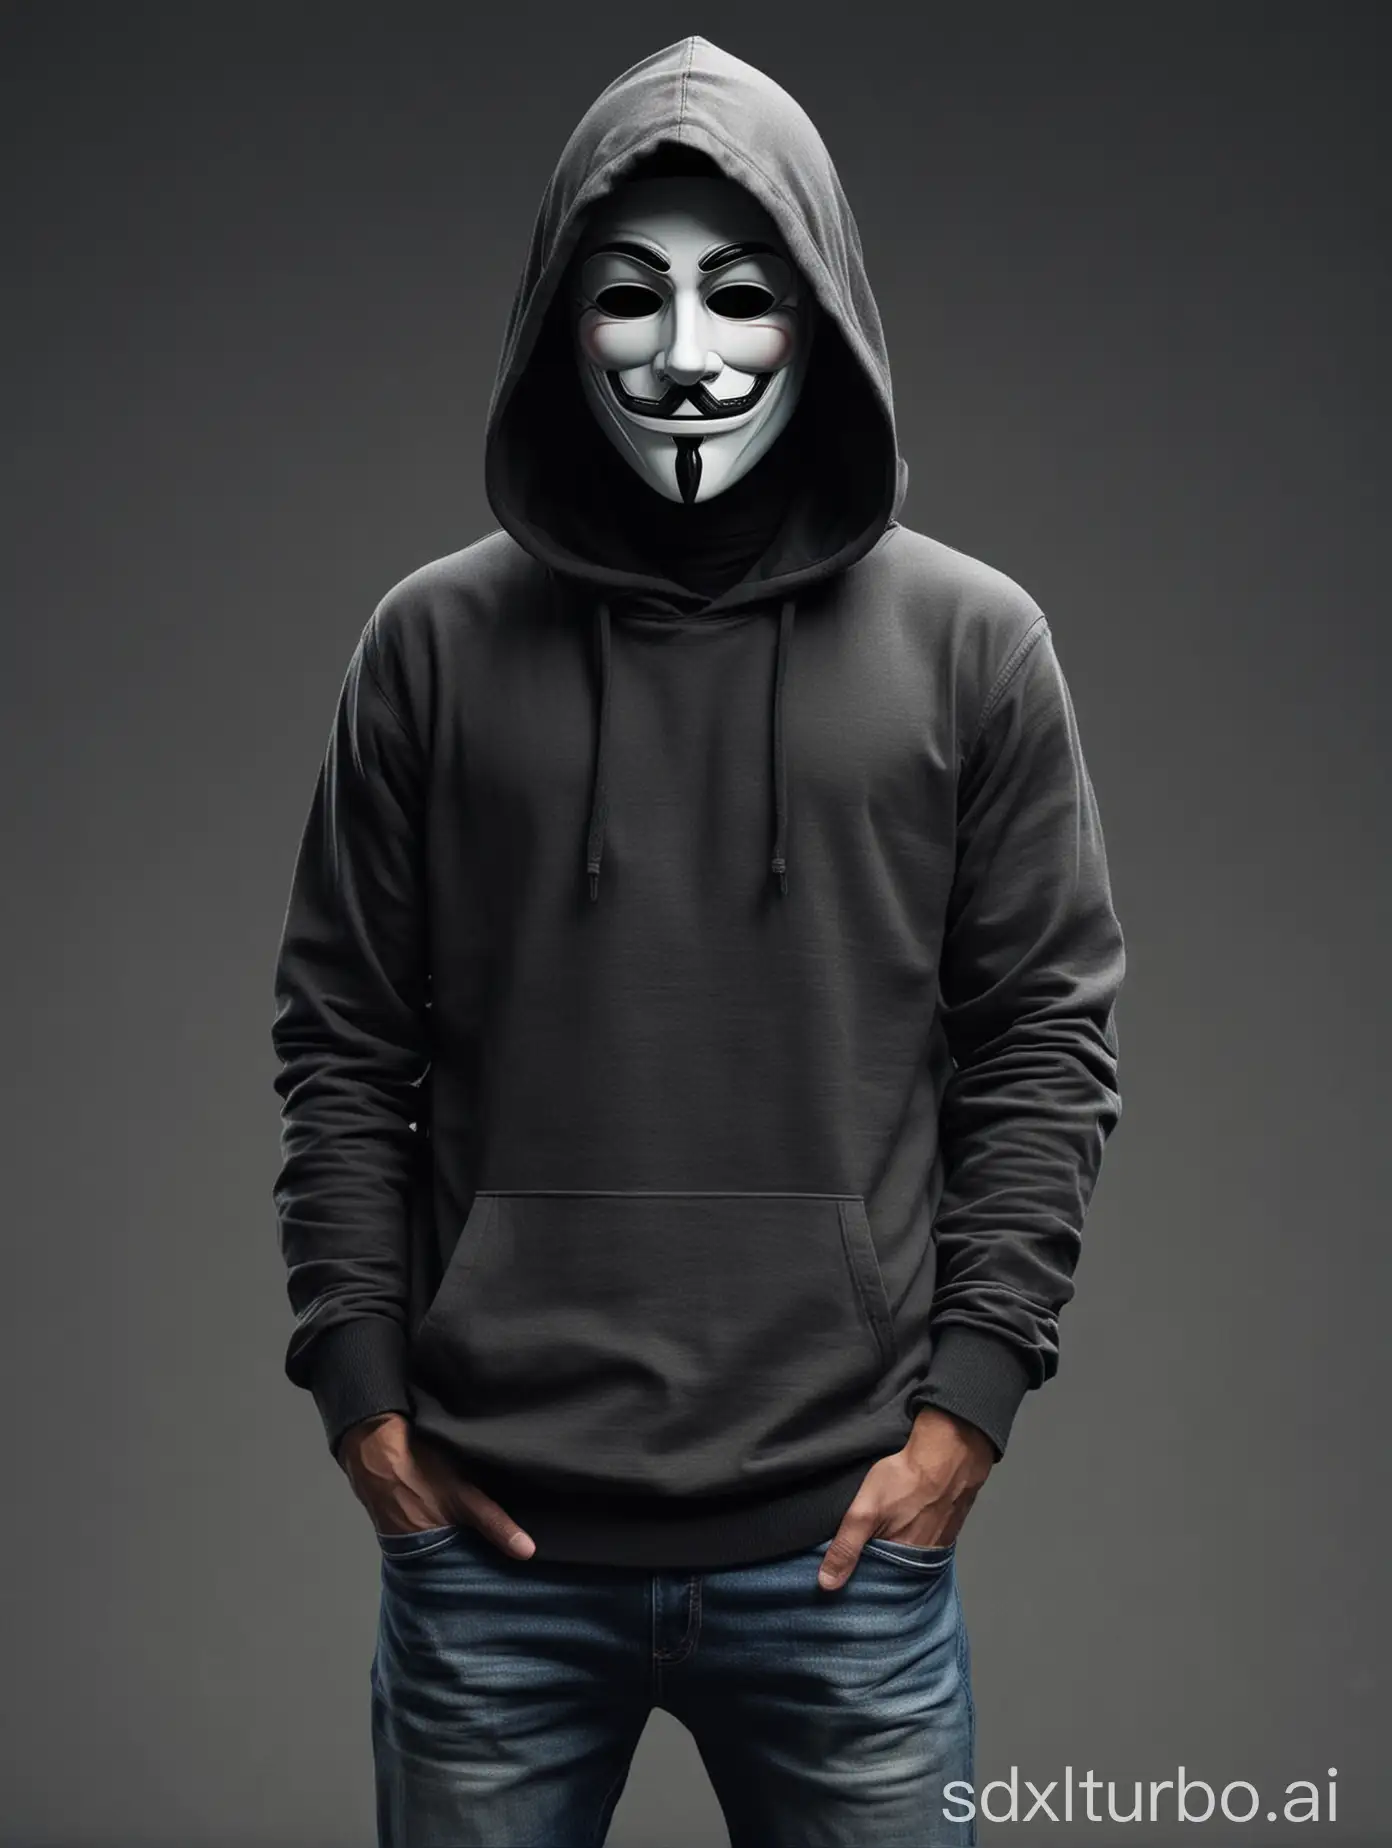 Create an anonymous computer specialist but without a mask and with darker clothing with a hood and sweater